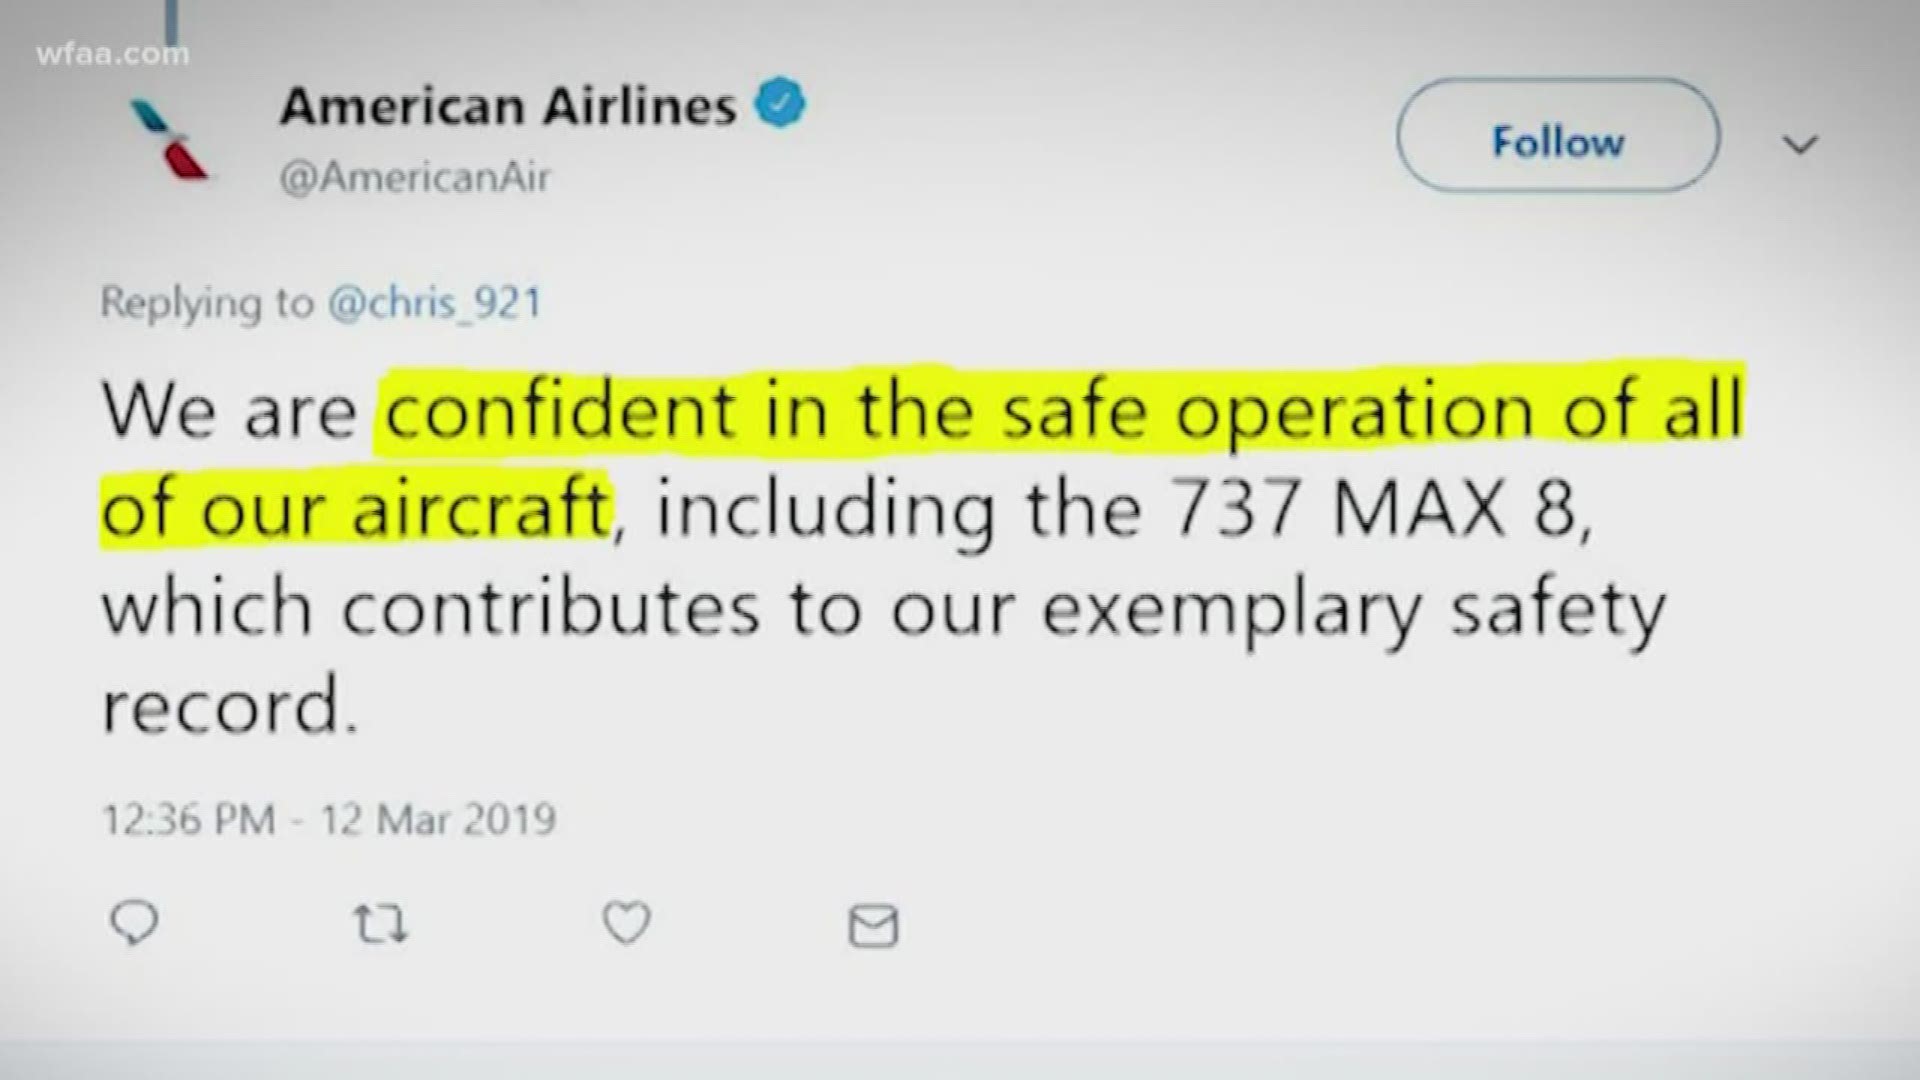 Both North Texas-based airlines have expressed confidence in the aircraft, despite two crashes in recent months.